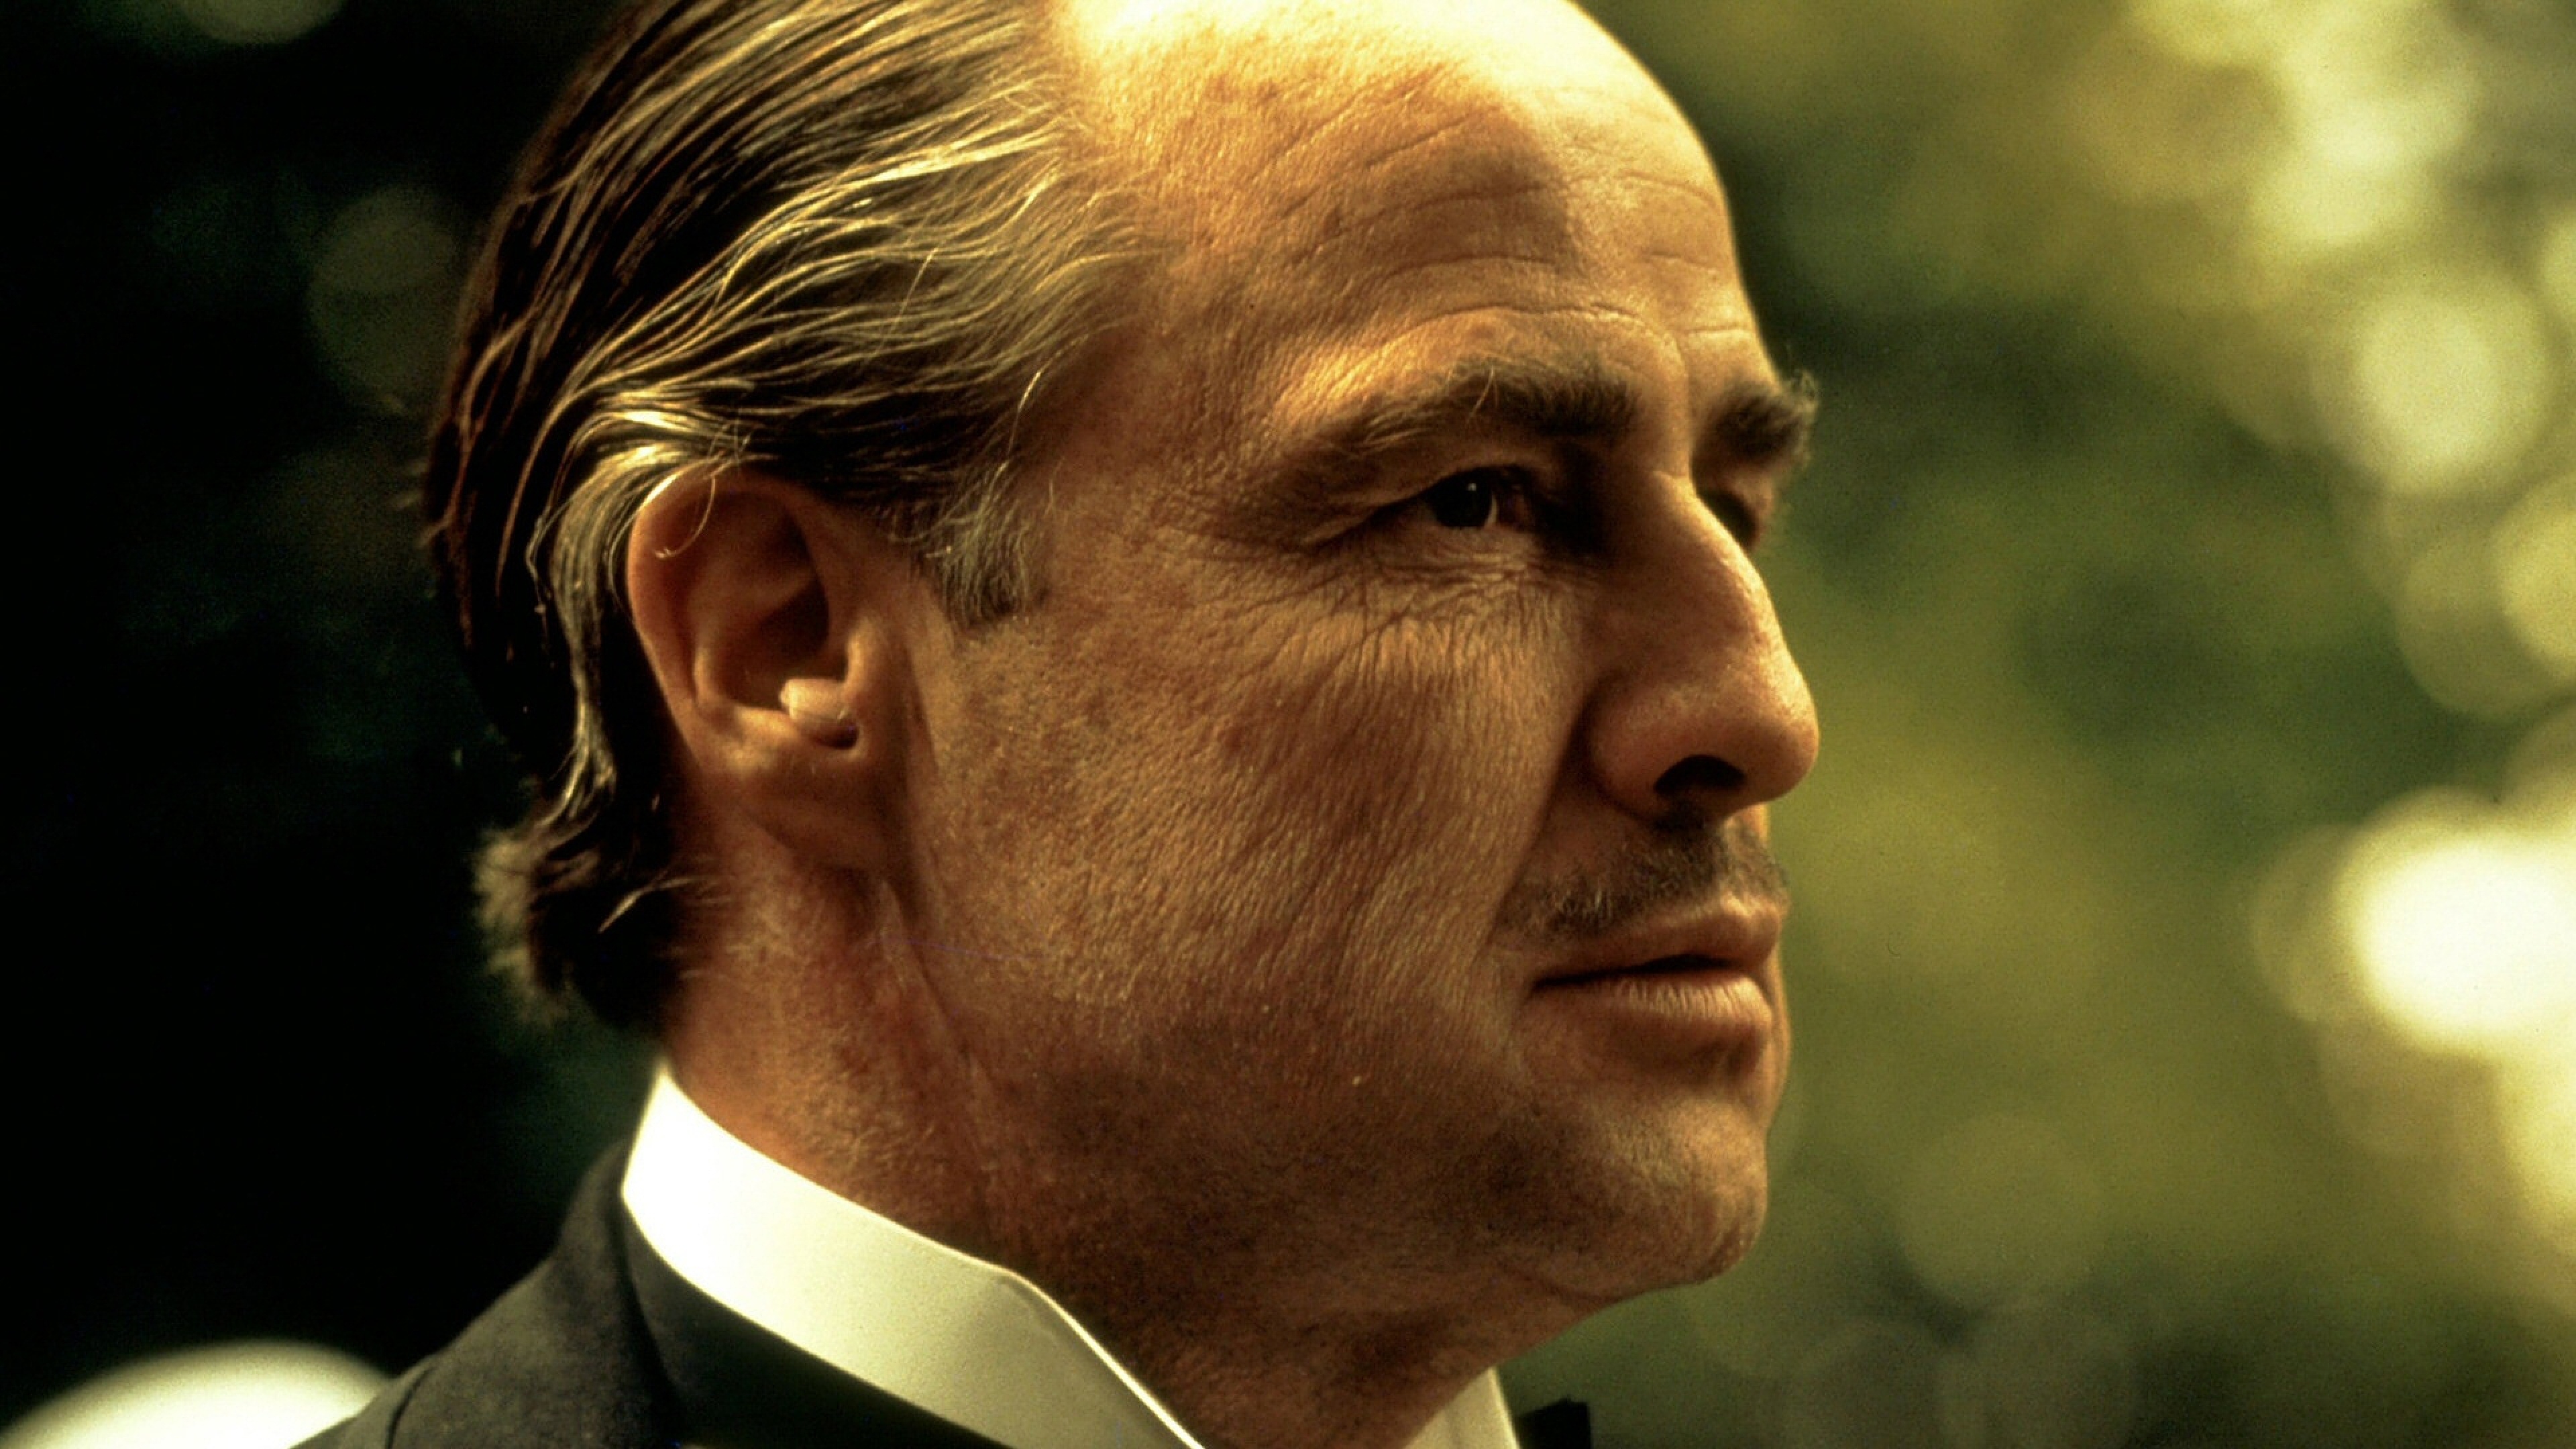 The Godfather Theme Song | Movie Theme Songs & TV Soundtracks